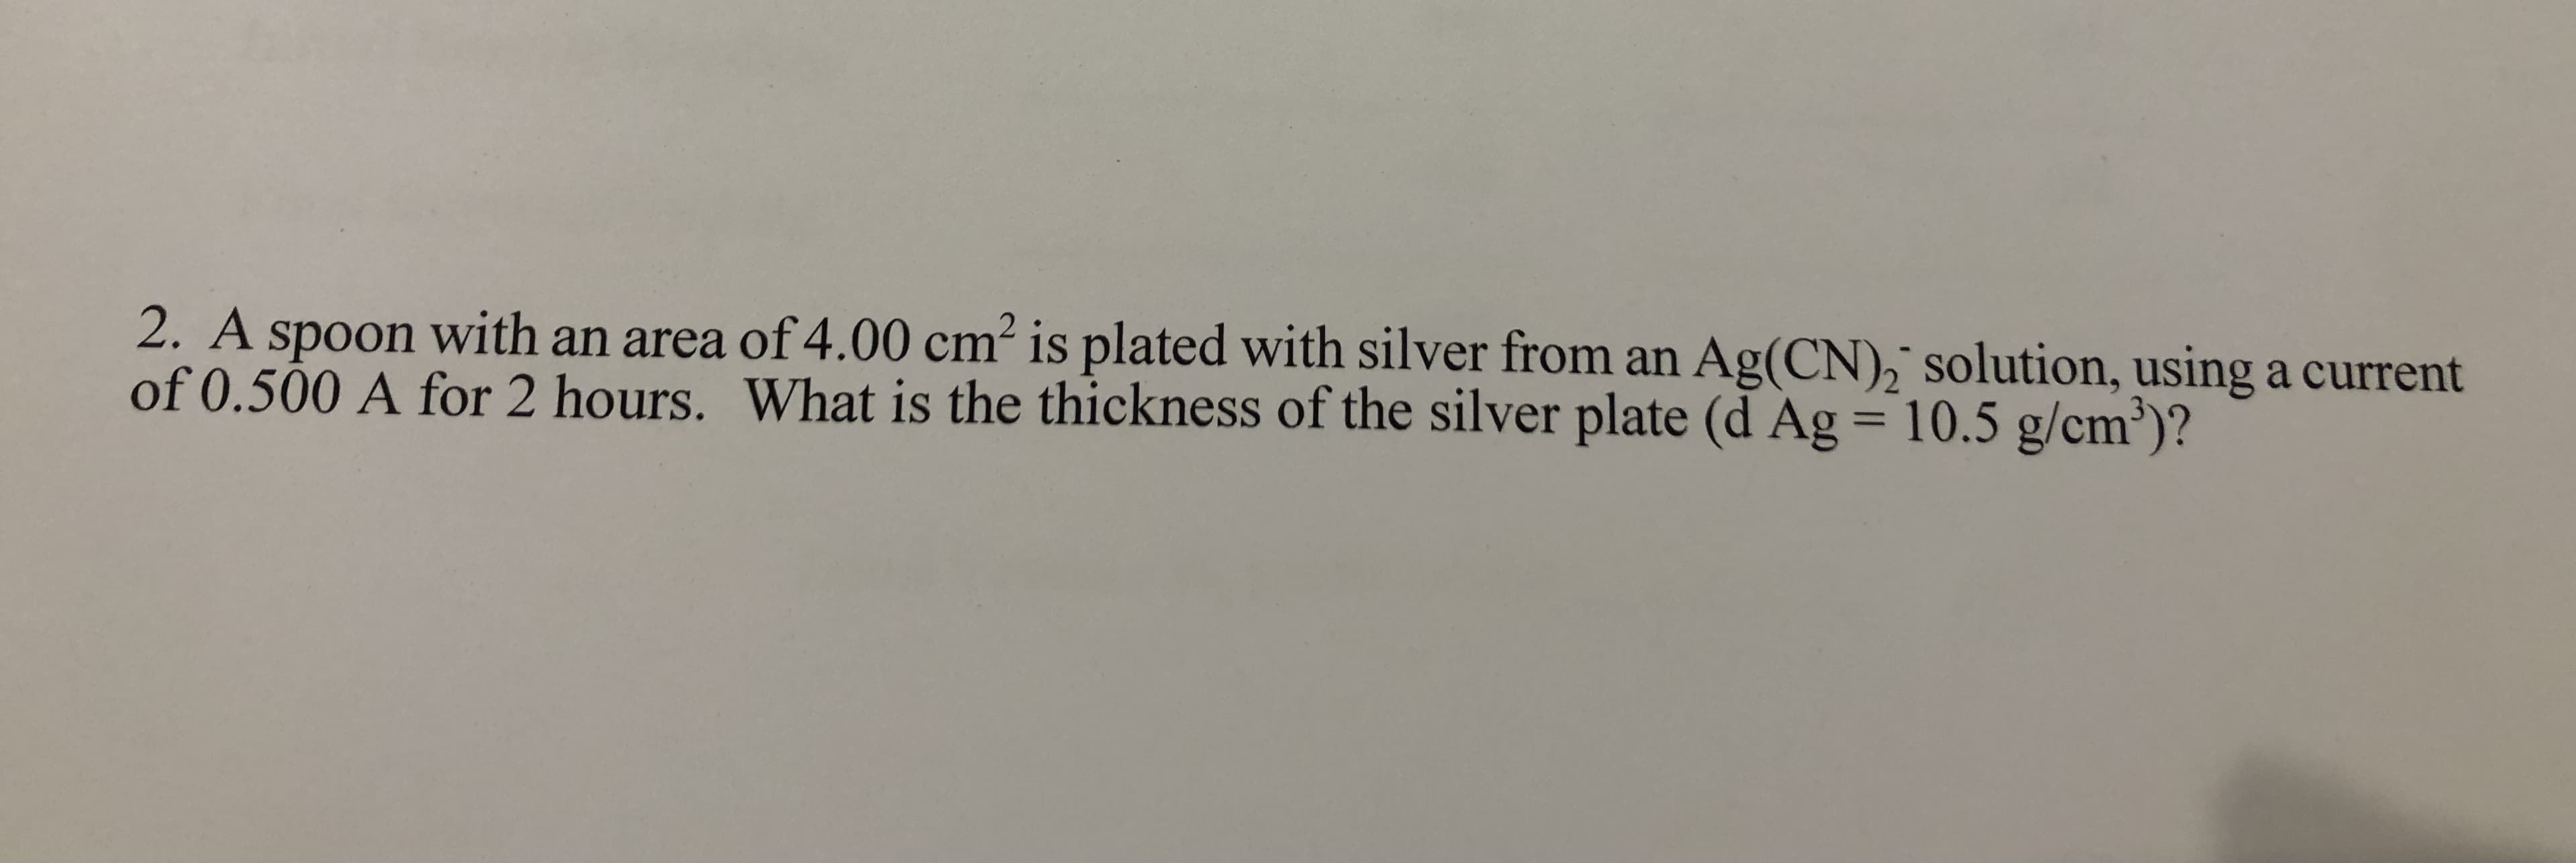 2. A spoon with an area of4.00 cm² is plated with silver from an Ag(CN),¯ solution, using a current
of 0.500 A for 2 hours. What is the thickness of the silver plate (d Ag = 10.5 g/cm')?
%3D
